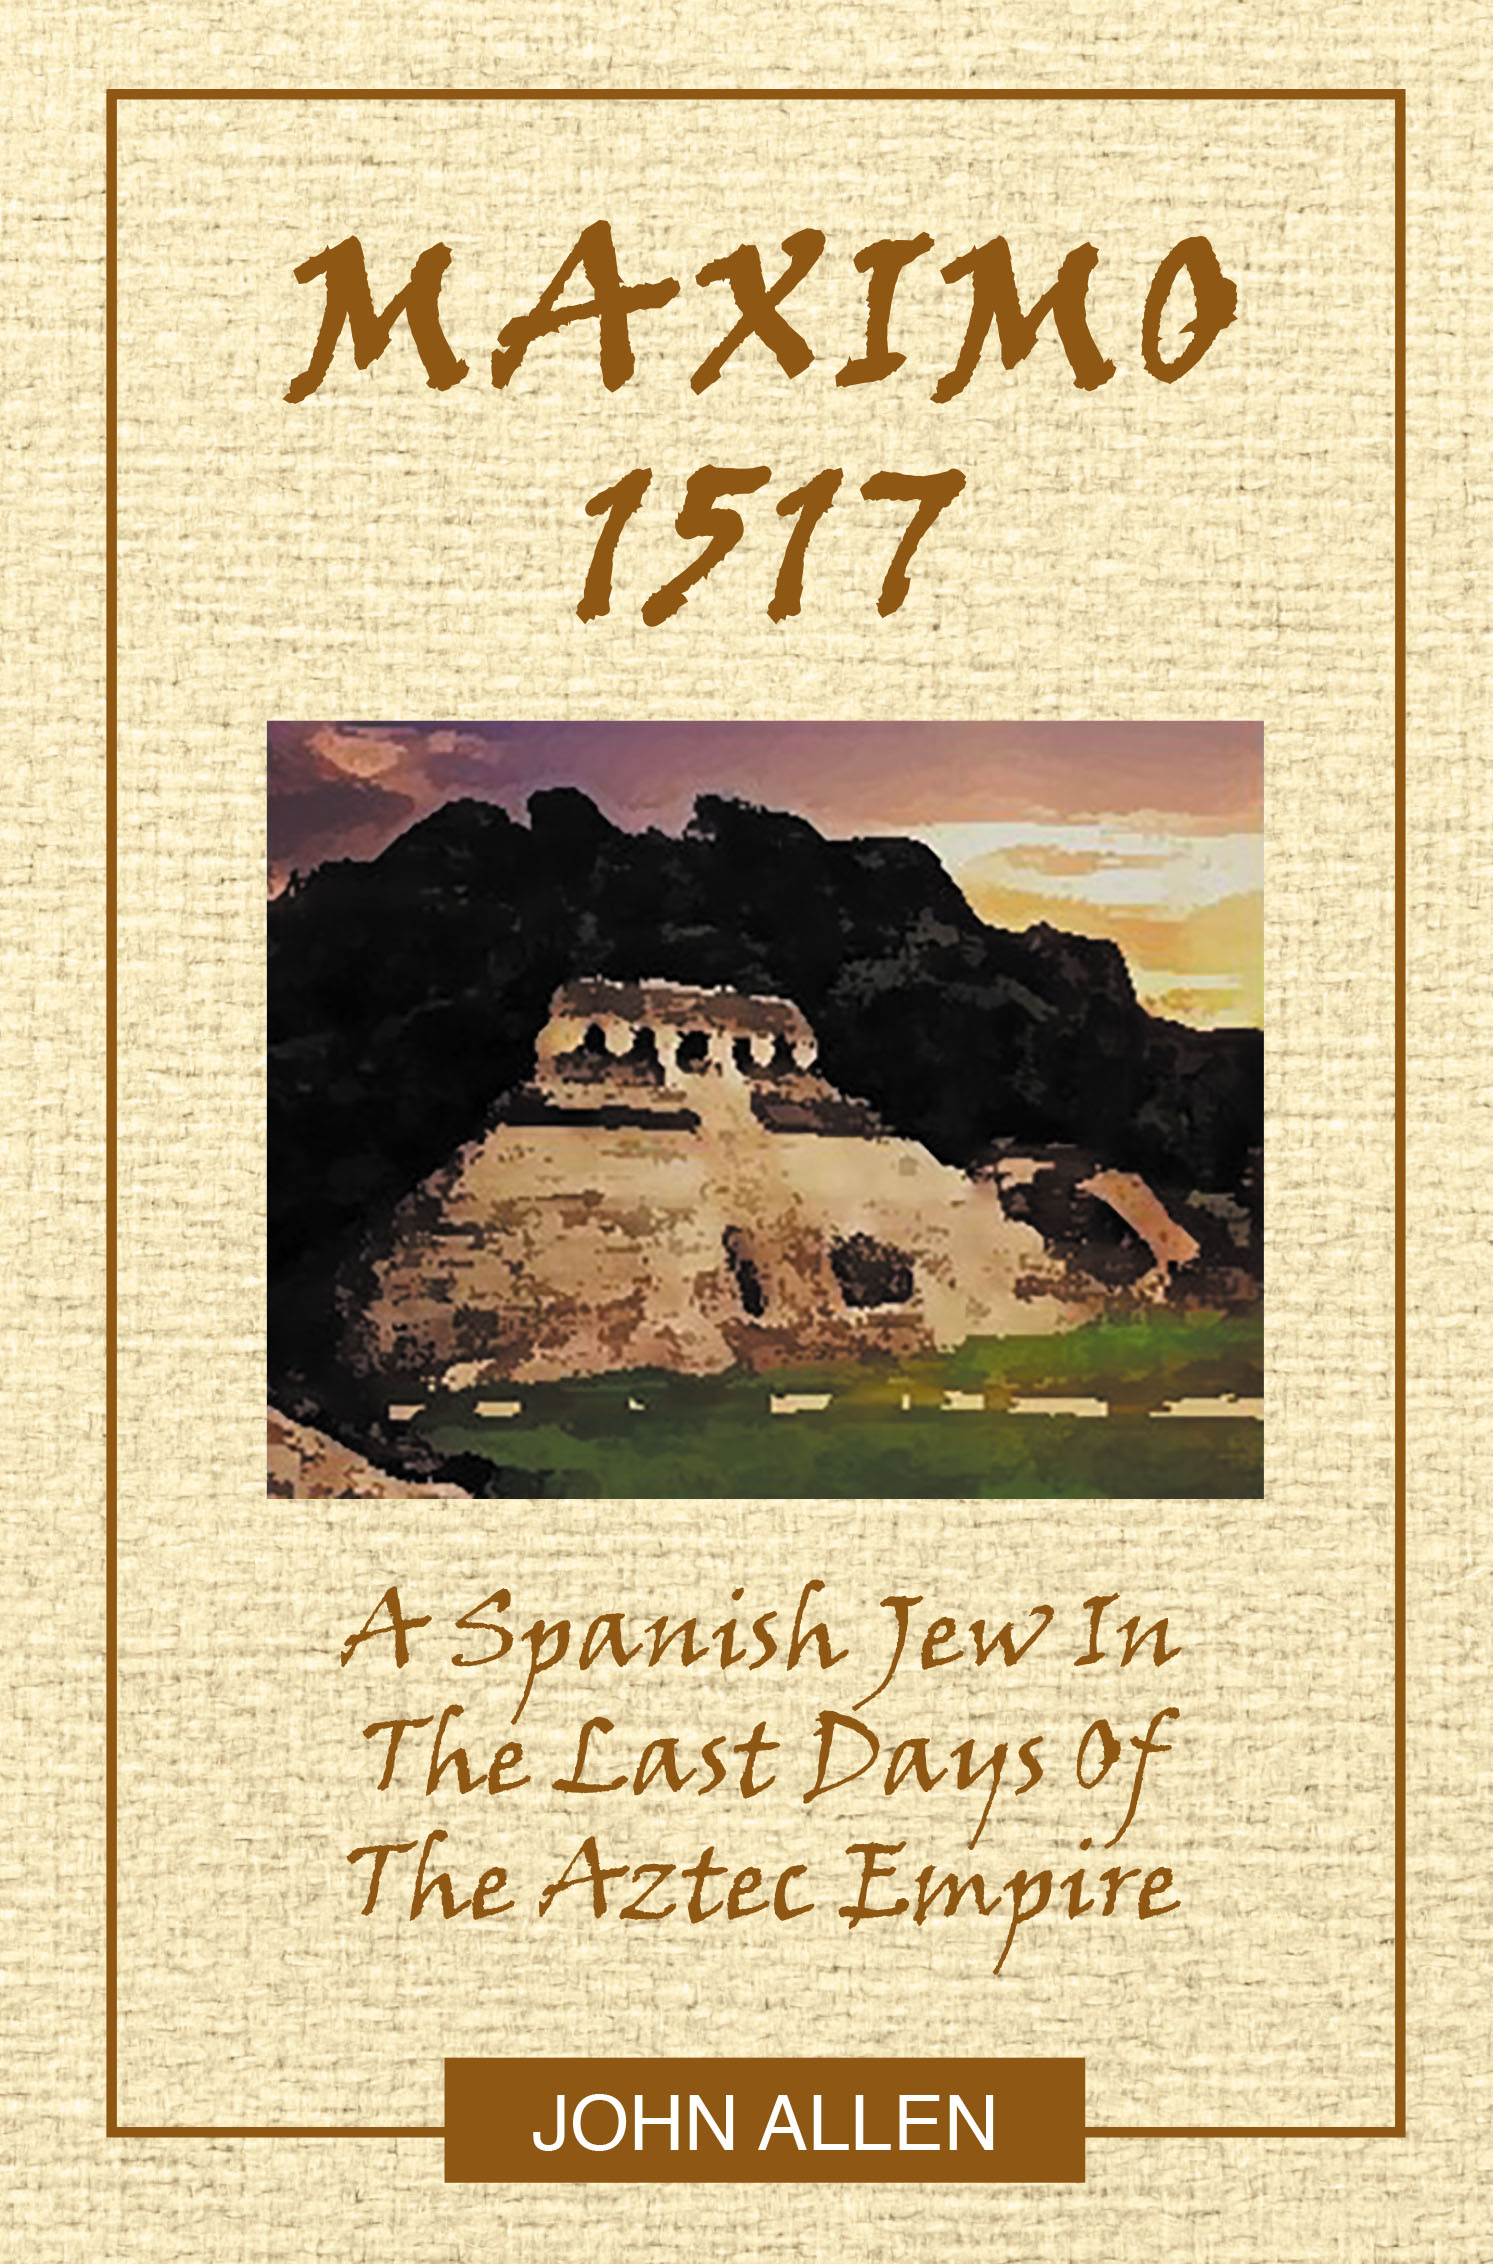 Author John Allen’s New Book, “MAXIMO 1517: A Spanish Jew in The Last Days of The Aztec Empire,” Follows a Young Spanish Jew in the Land of Mesoamerica